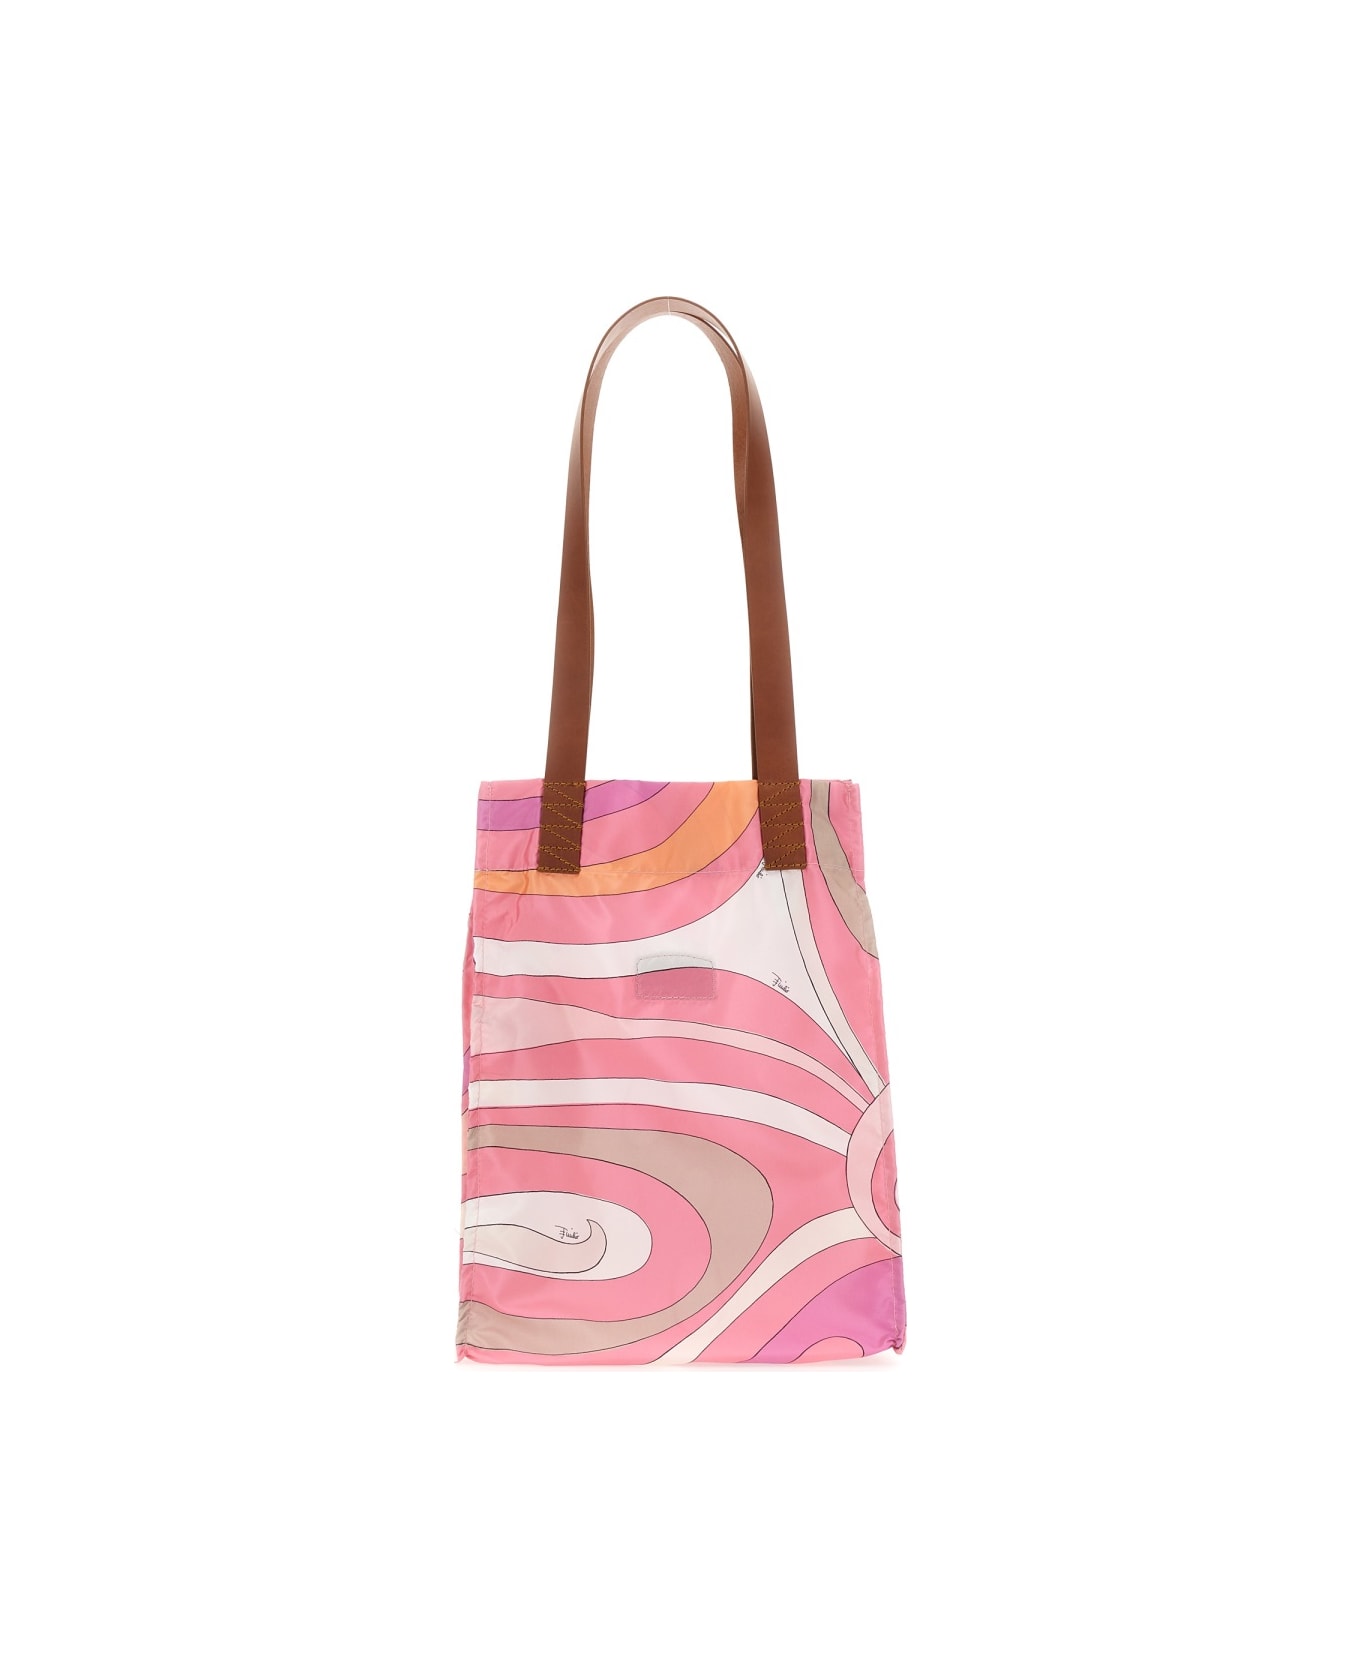 Pucci Patterned Tote Bag - PINK